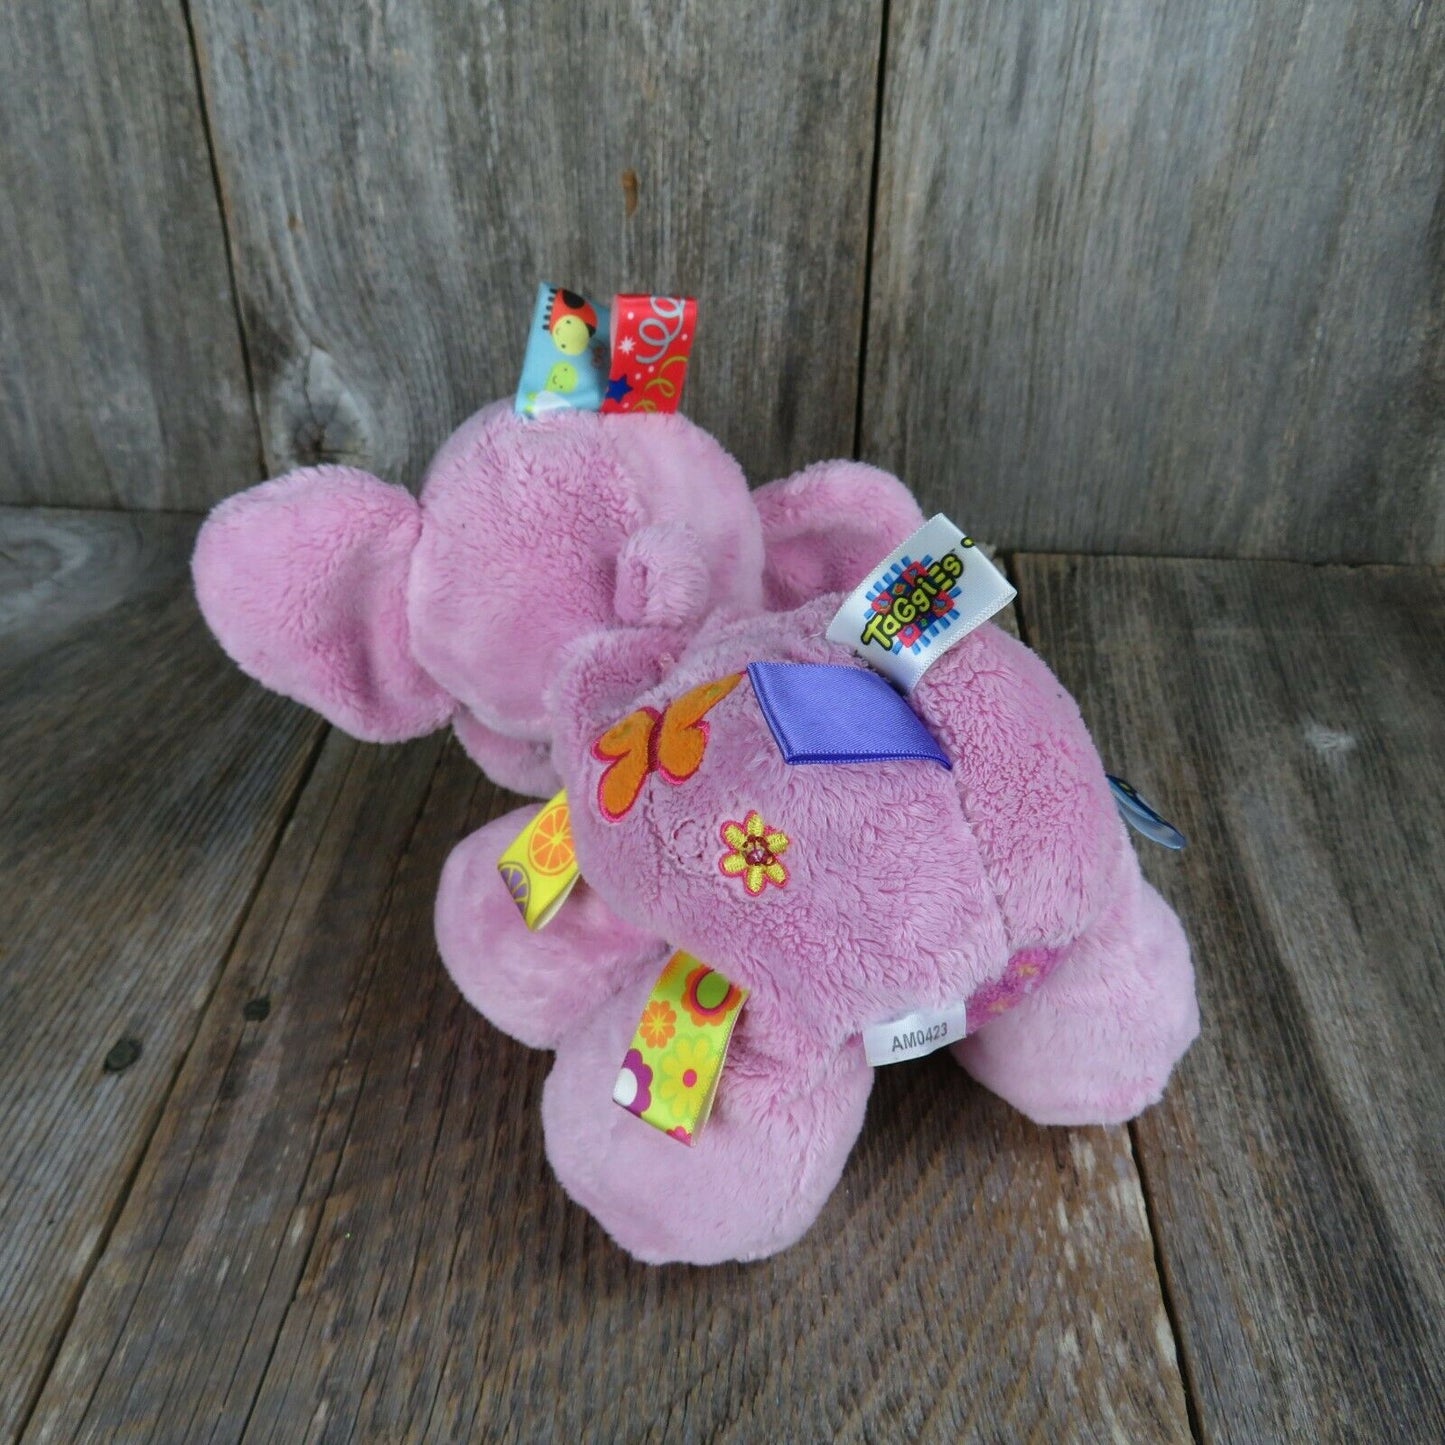 Pink Elephant Plush Tag N Play Taggies Baby Toy Lovey Tags Rattle Stuffed Animal